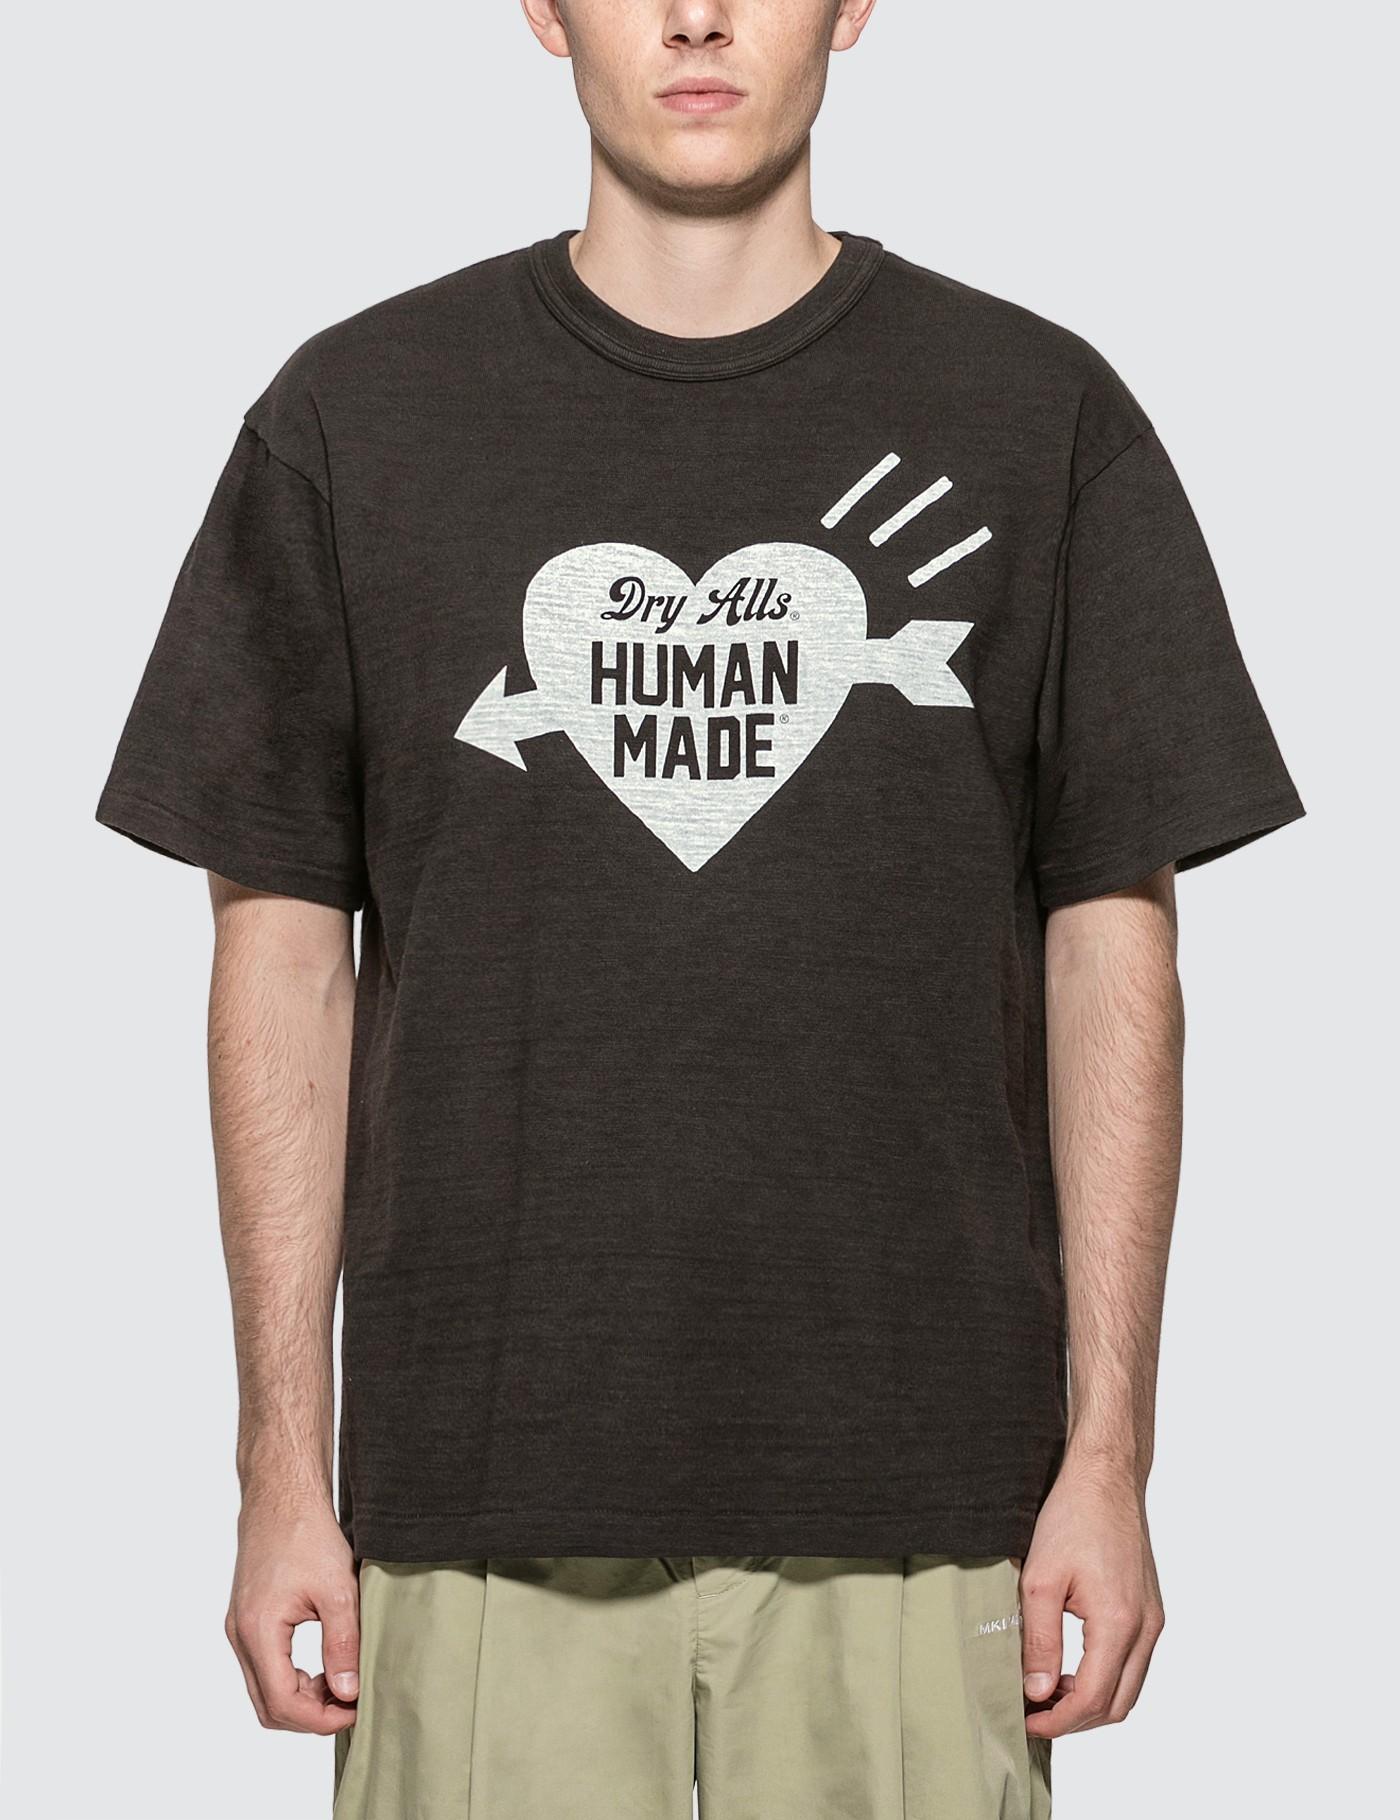 Human Made Cotton T-shirt #1818 in Black for Men - Lyst